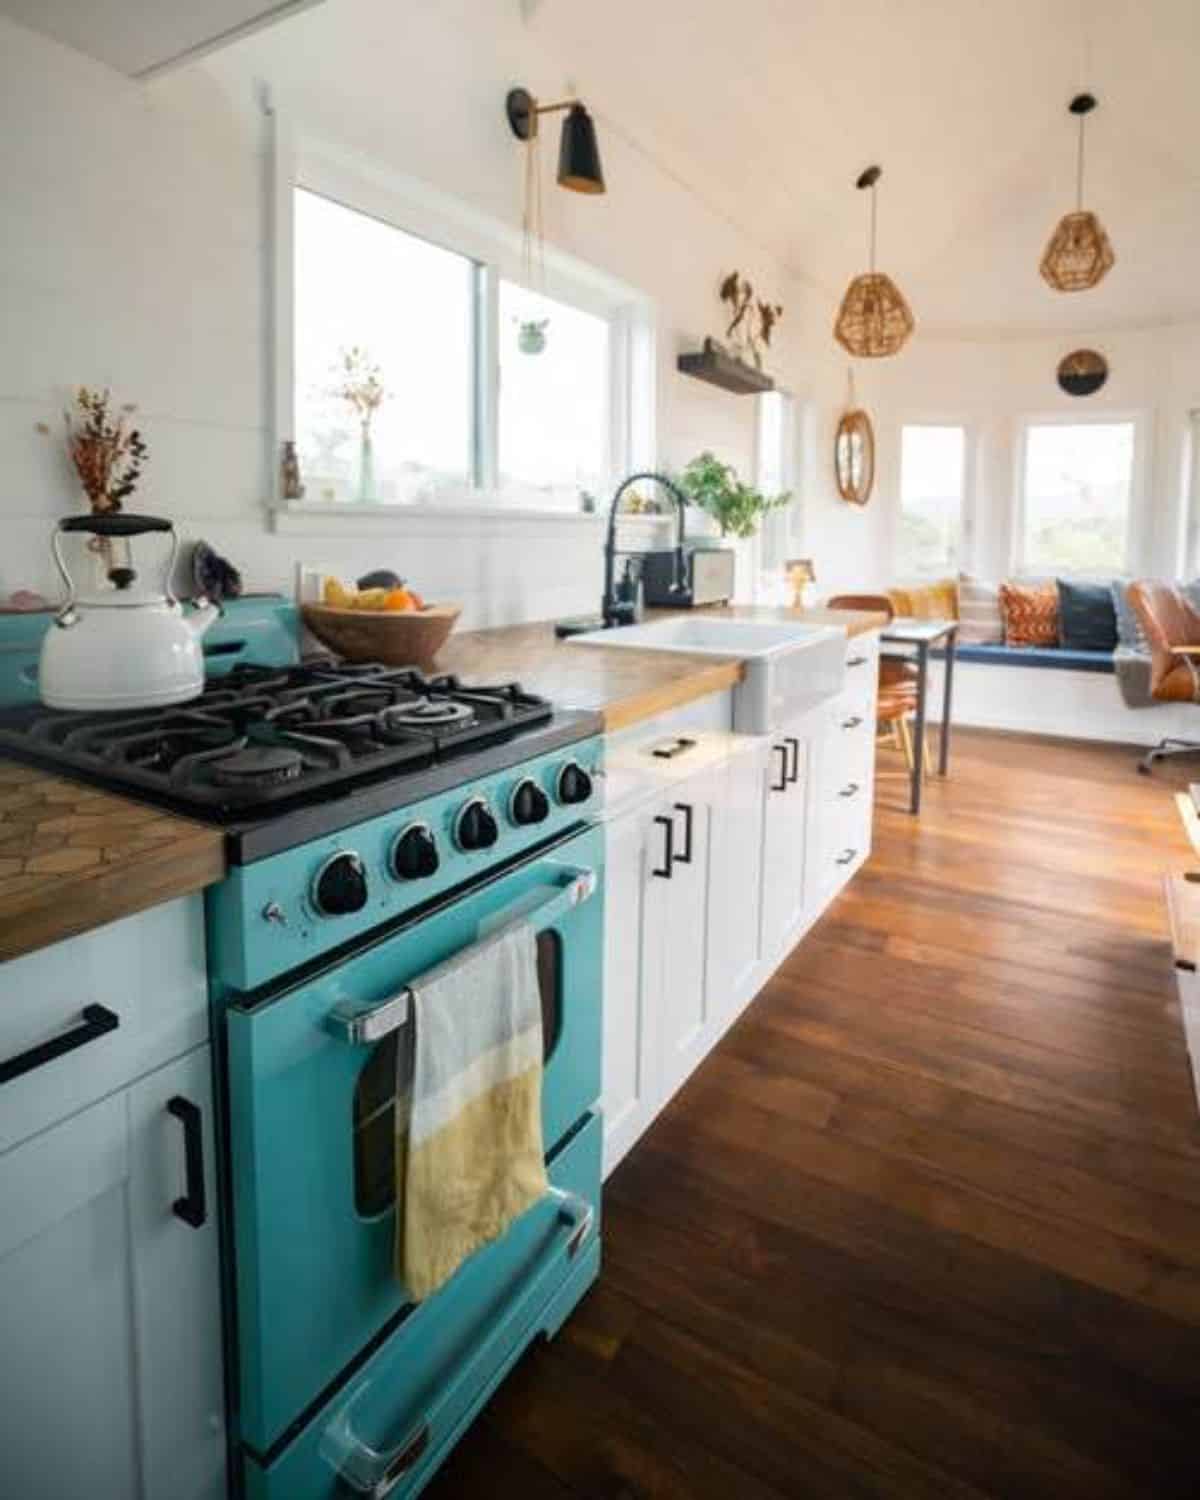 Well organized and with lots of storage in kitchen of High End Tiny House